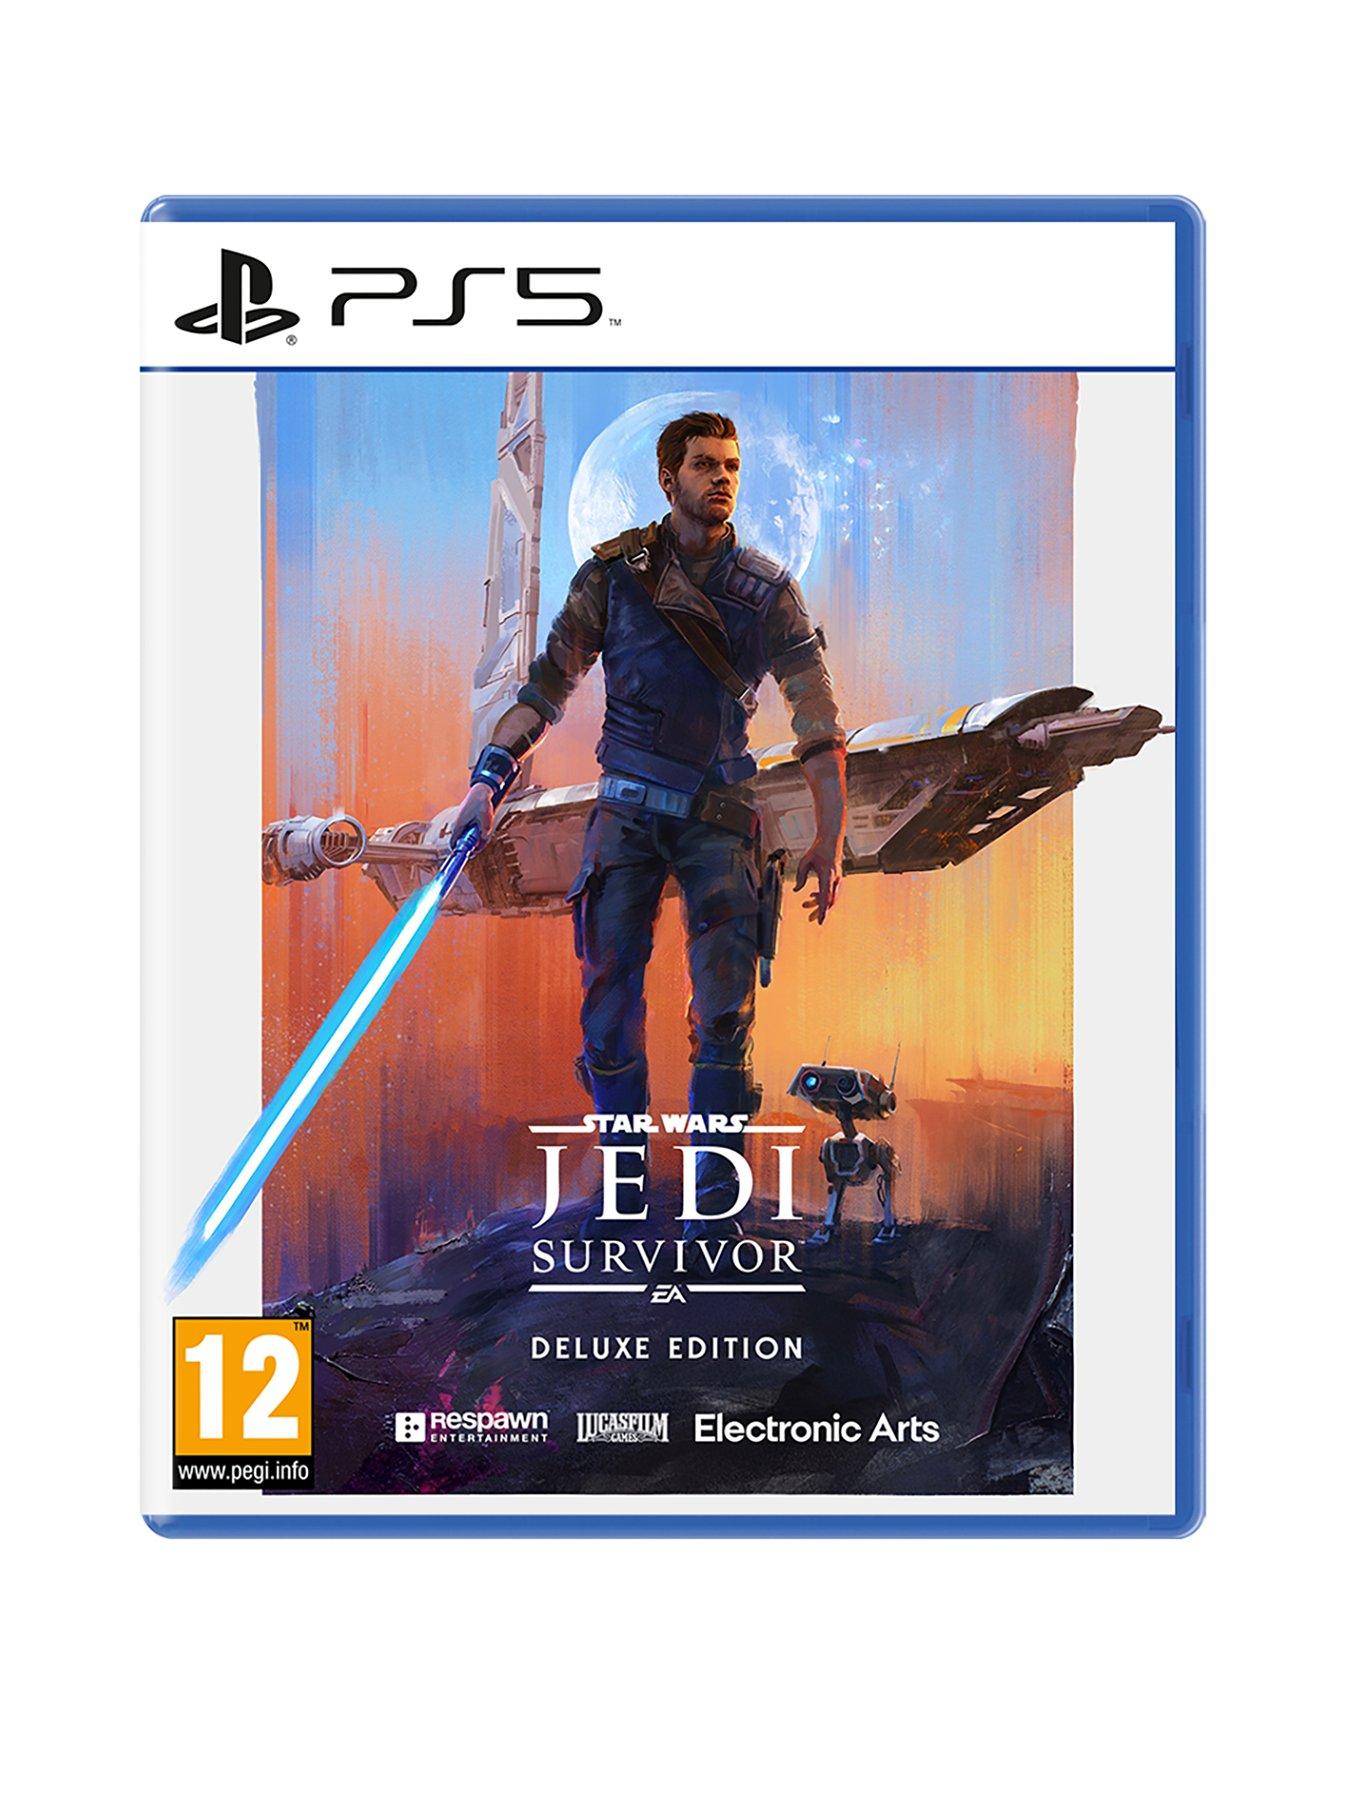 Star Wars Jedi: Survivor's ray tracing impresses on PS5 - but also causes  the biggest performance issues